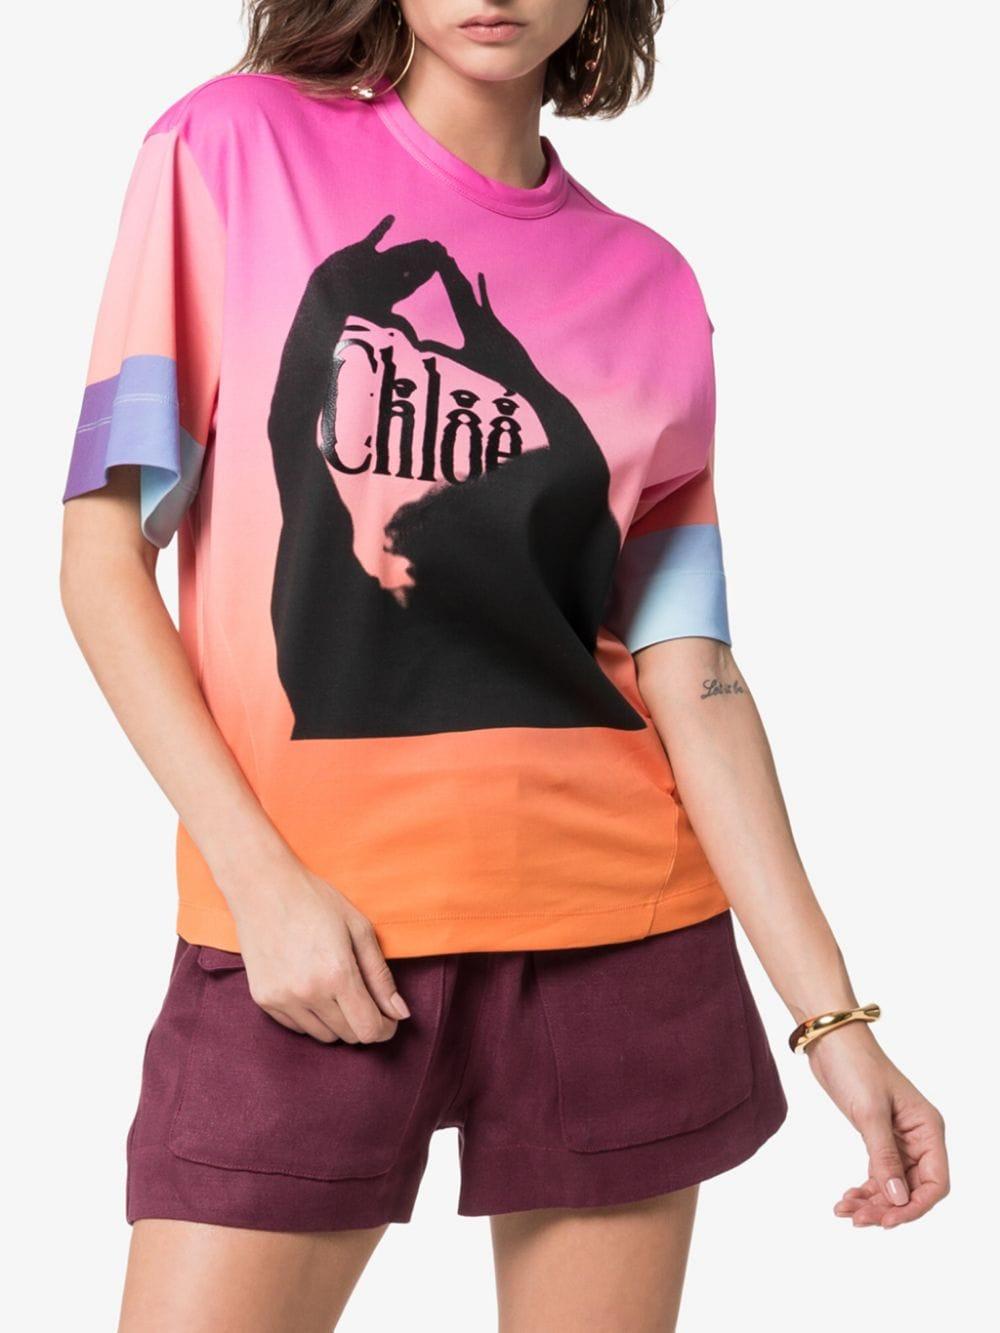 Chloé Ombre Logo Cotton T-shirt in Orange/Pink (Pink) | Lyst